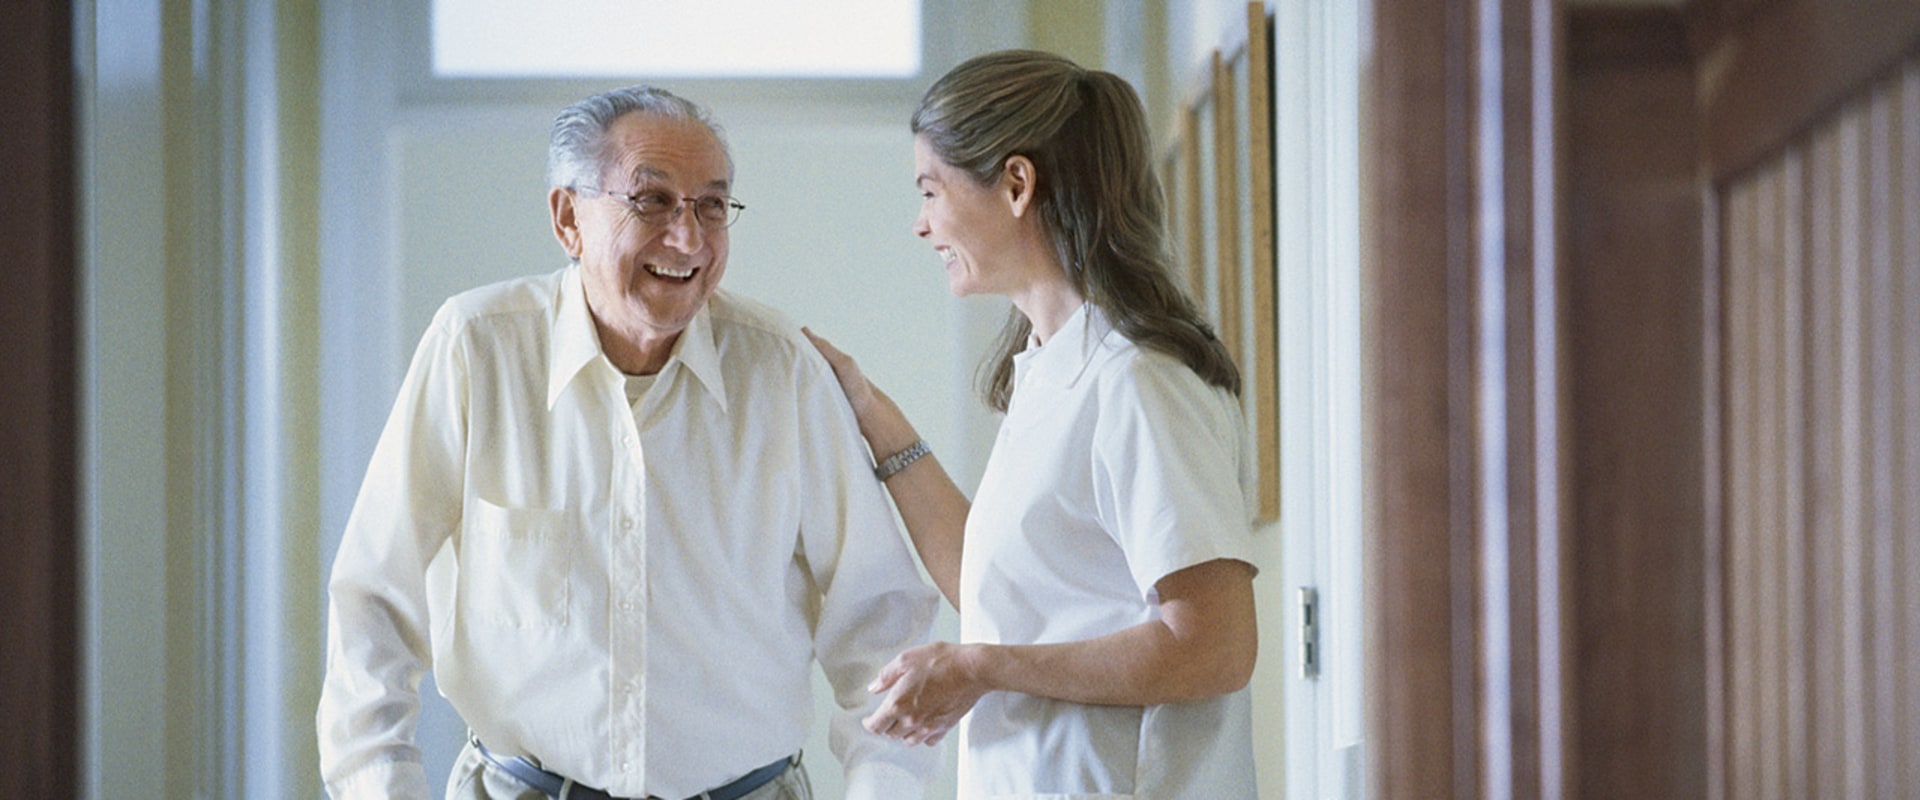 What are 5 benefits of living in a nursing home?